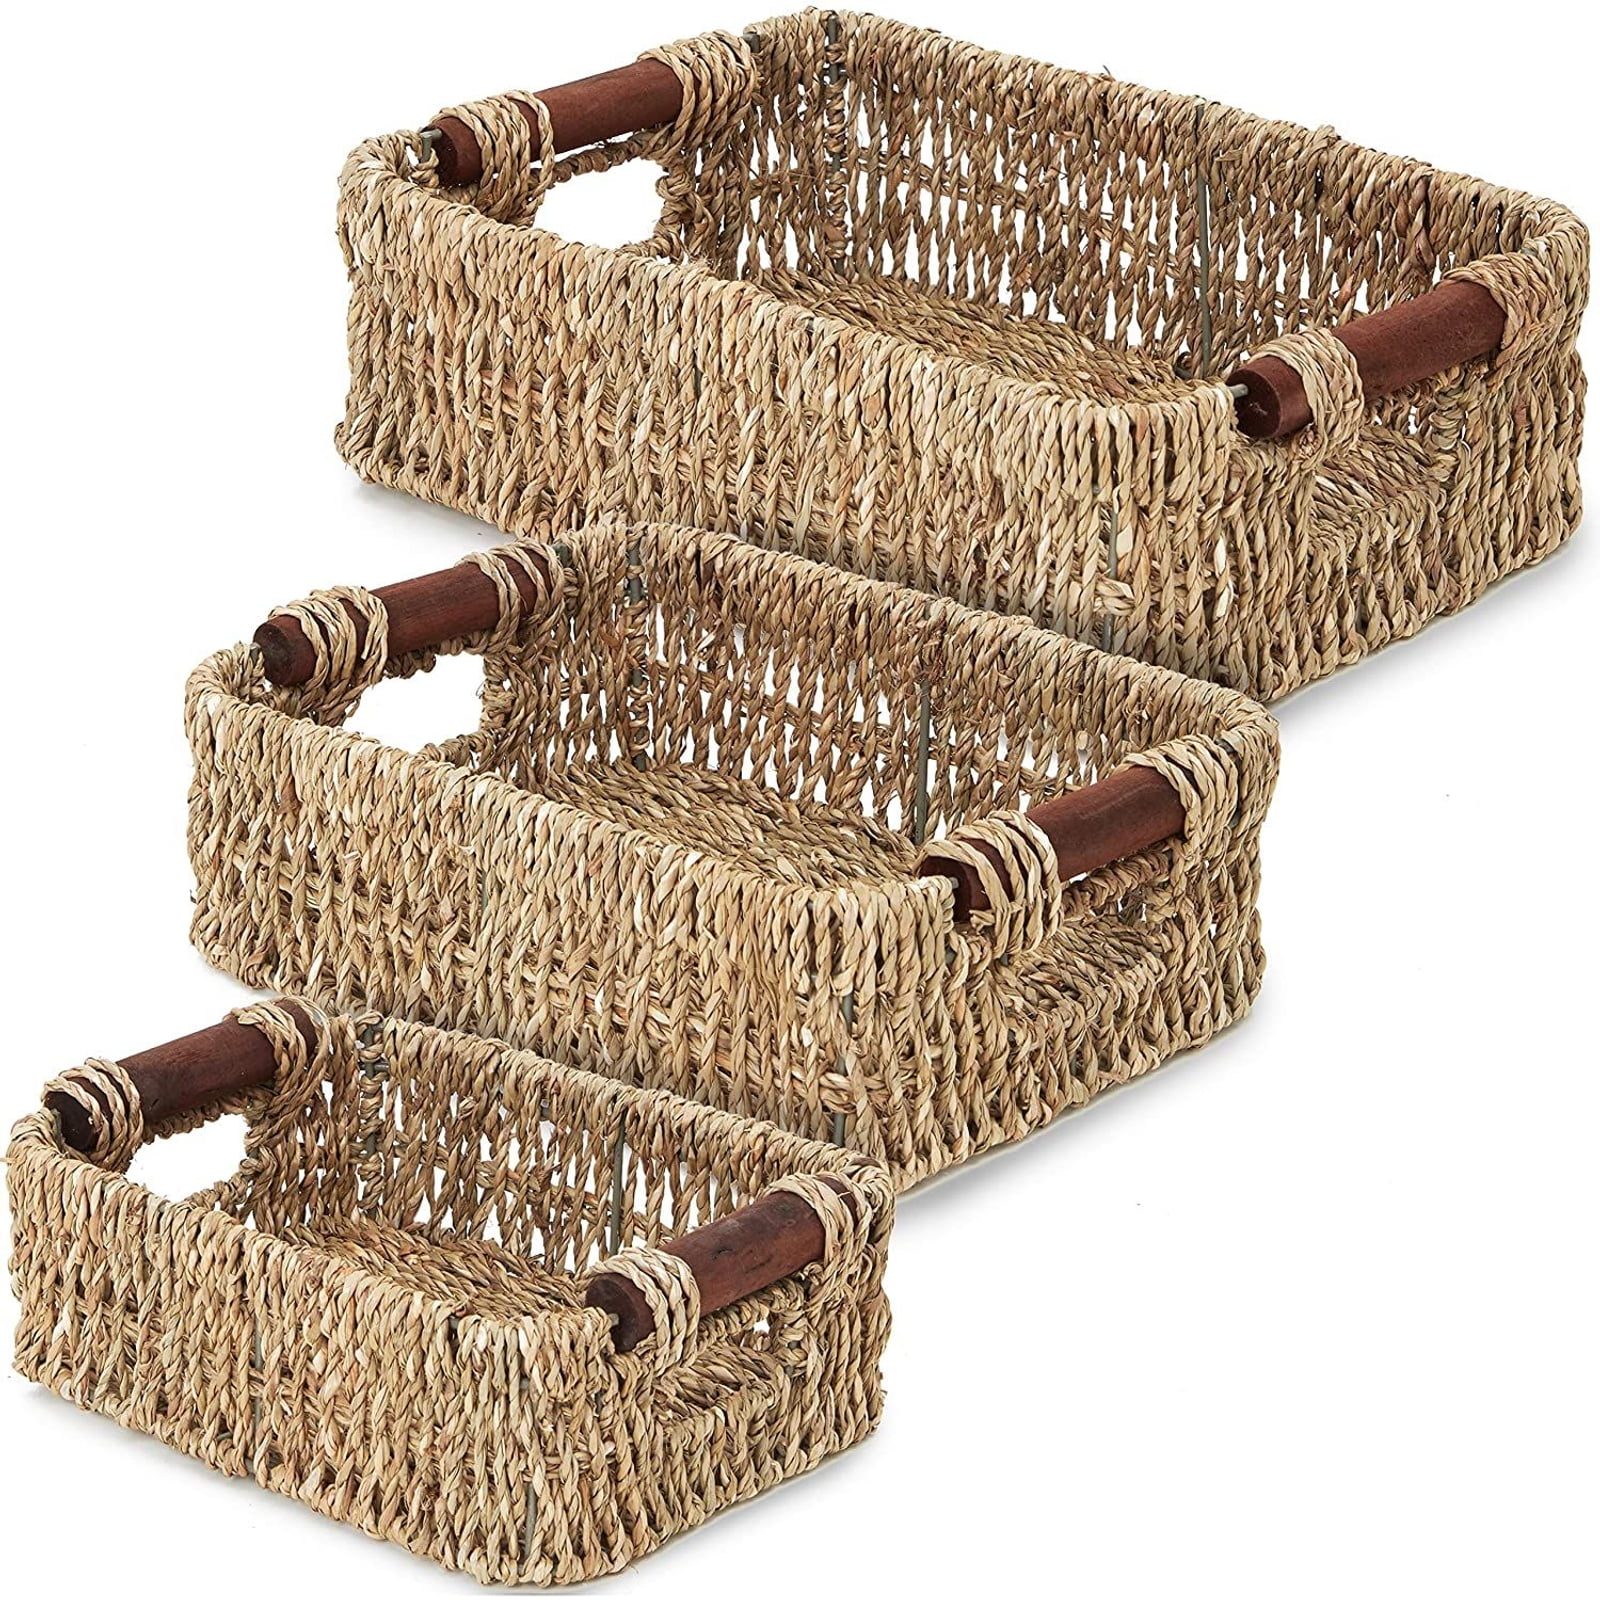 Used For Book And Sundries Storage Box Desktop Storage Basket Electric oven Hand-woven Rattan Rectangular Service Basket With Handles Size : S 